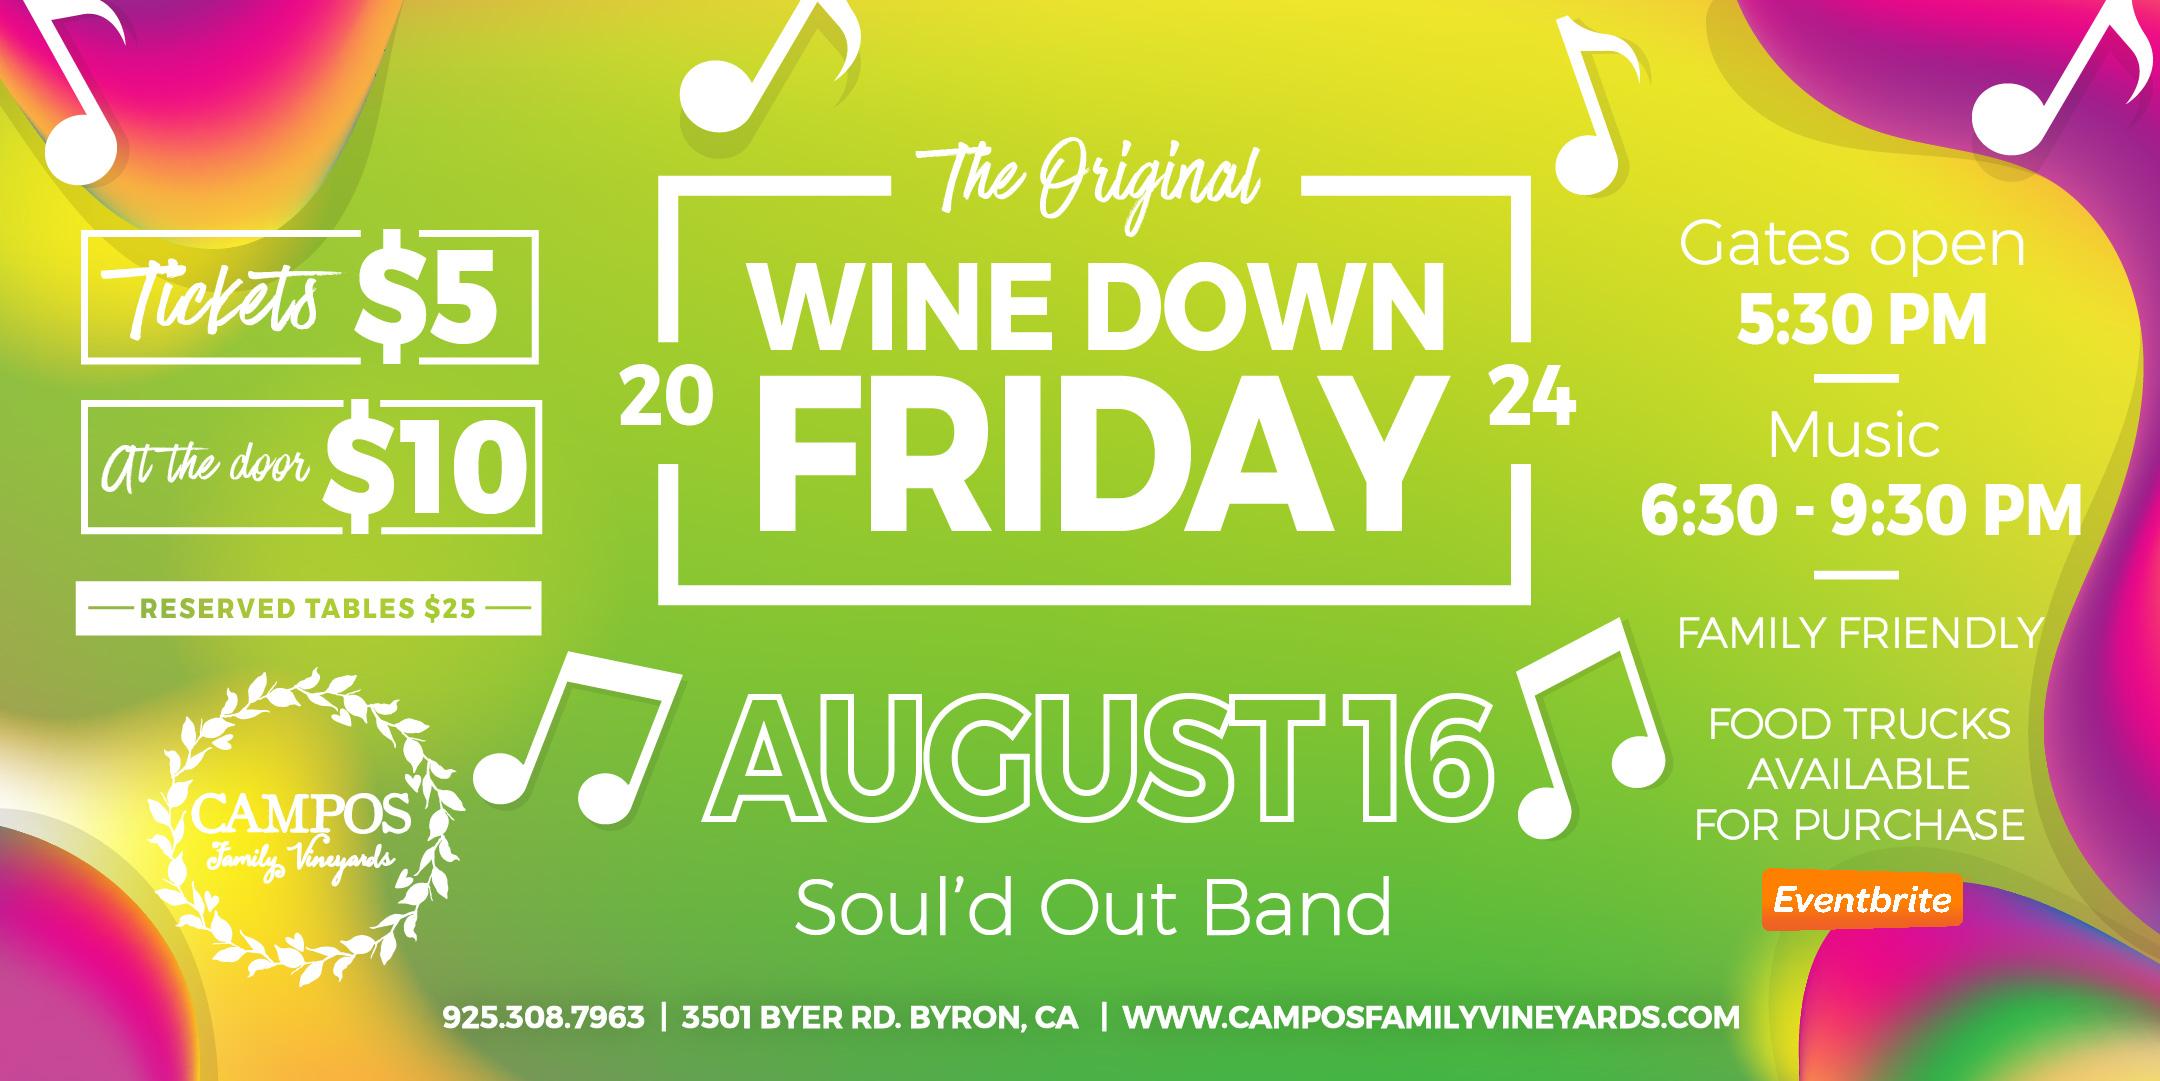 The Original Wine Down Friday - Steve Hanson and Friends